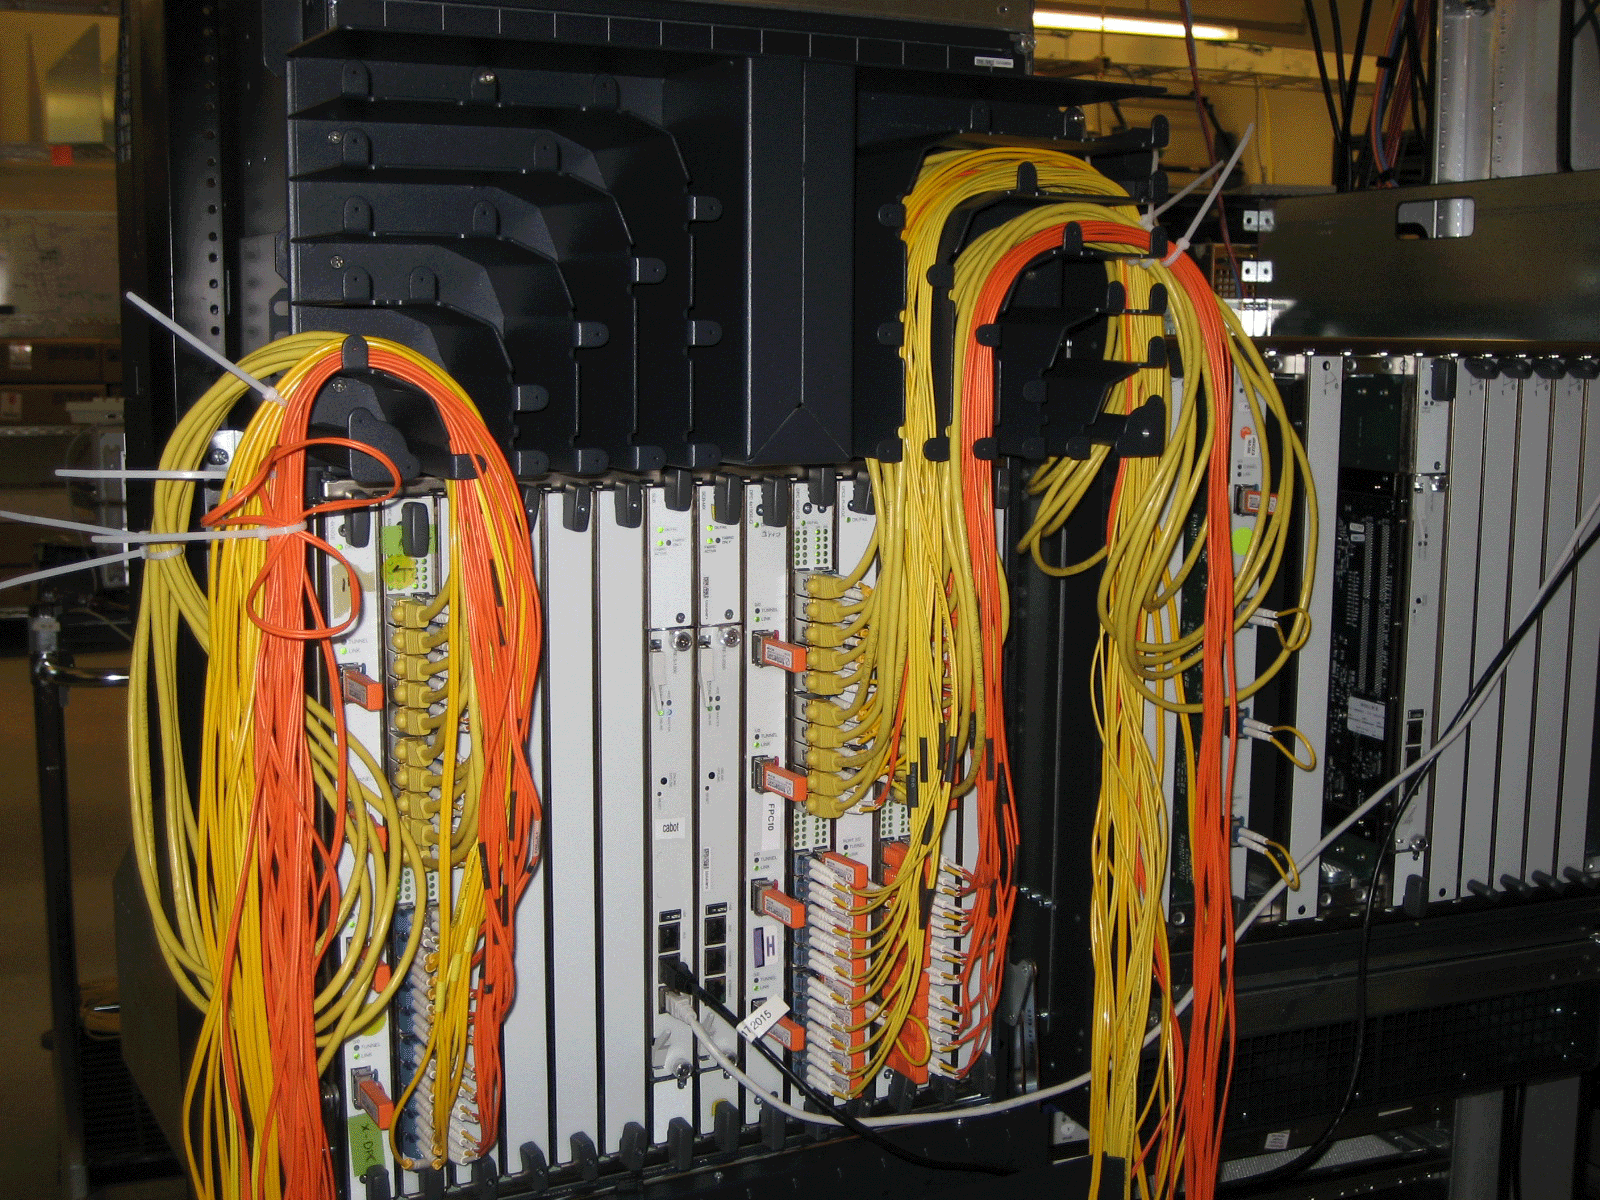 Dressing the Cables Through the Routing Channels